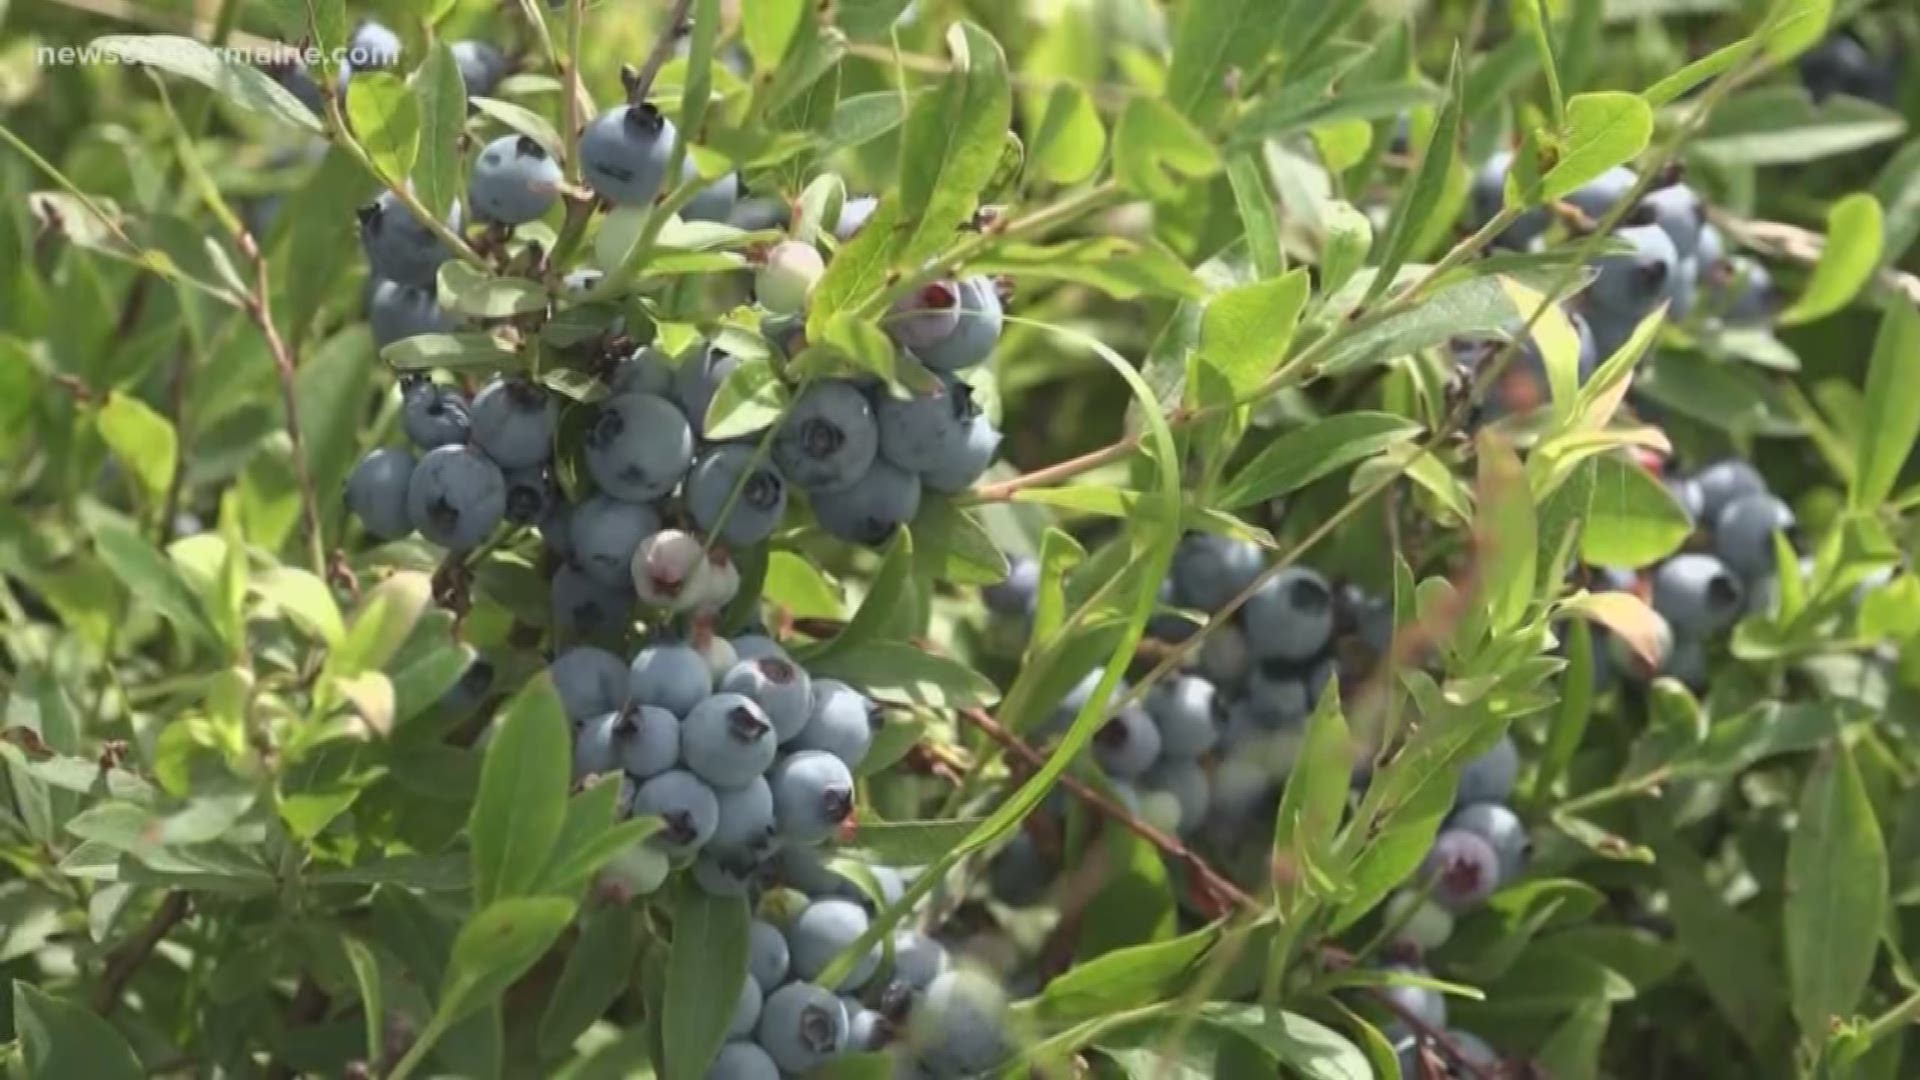 An expert with the University of Maine says the wet, cold spring is likely to blame for the berries just not coming in as they have in years past.